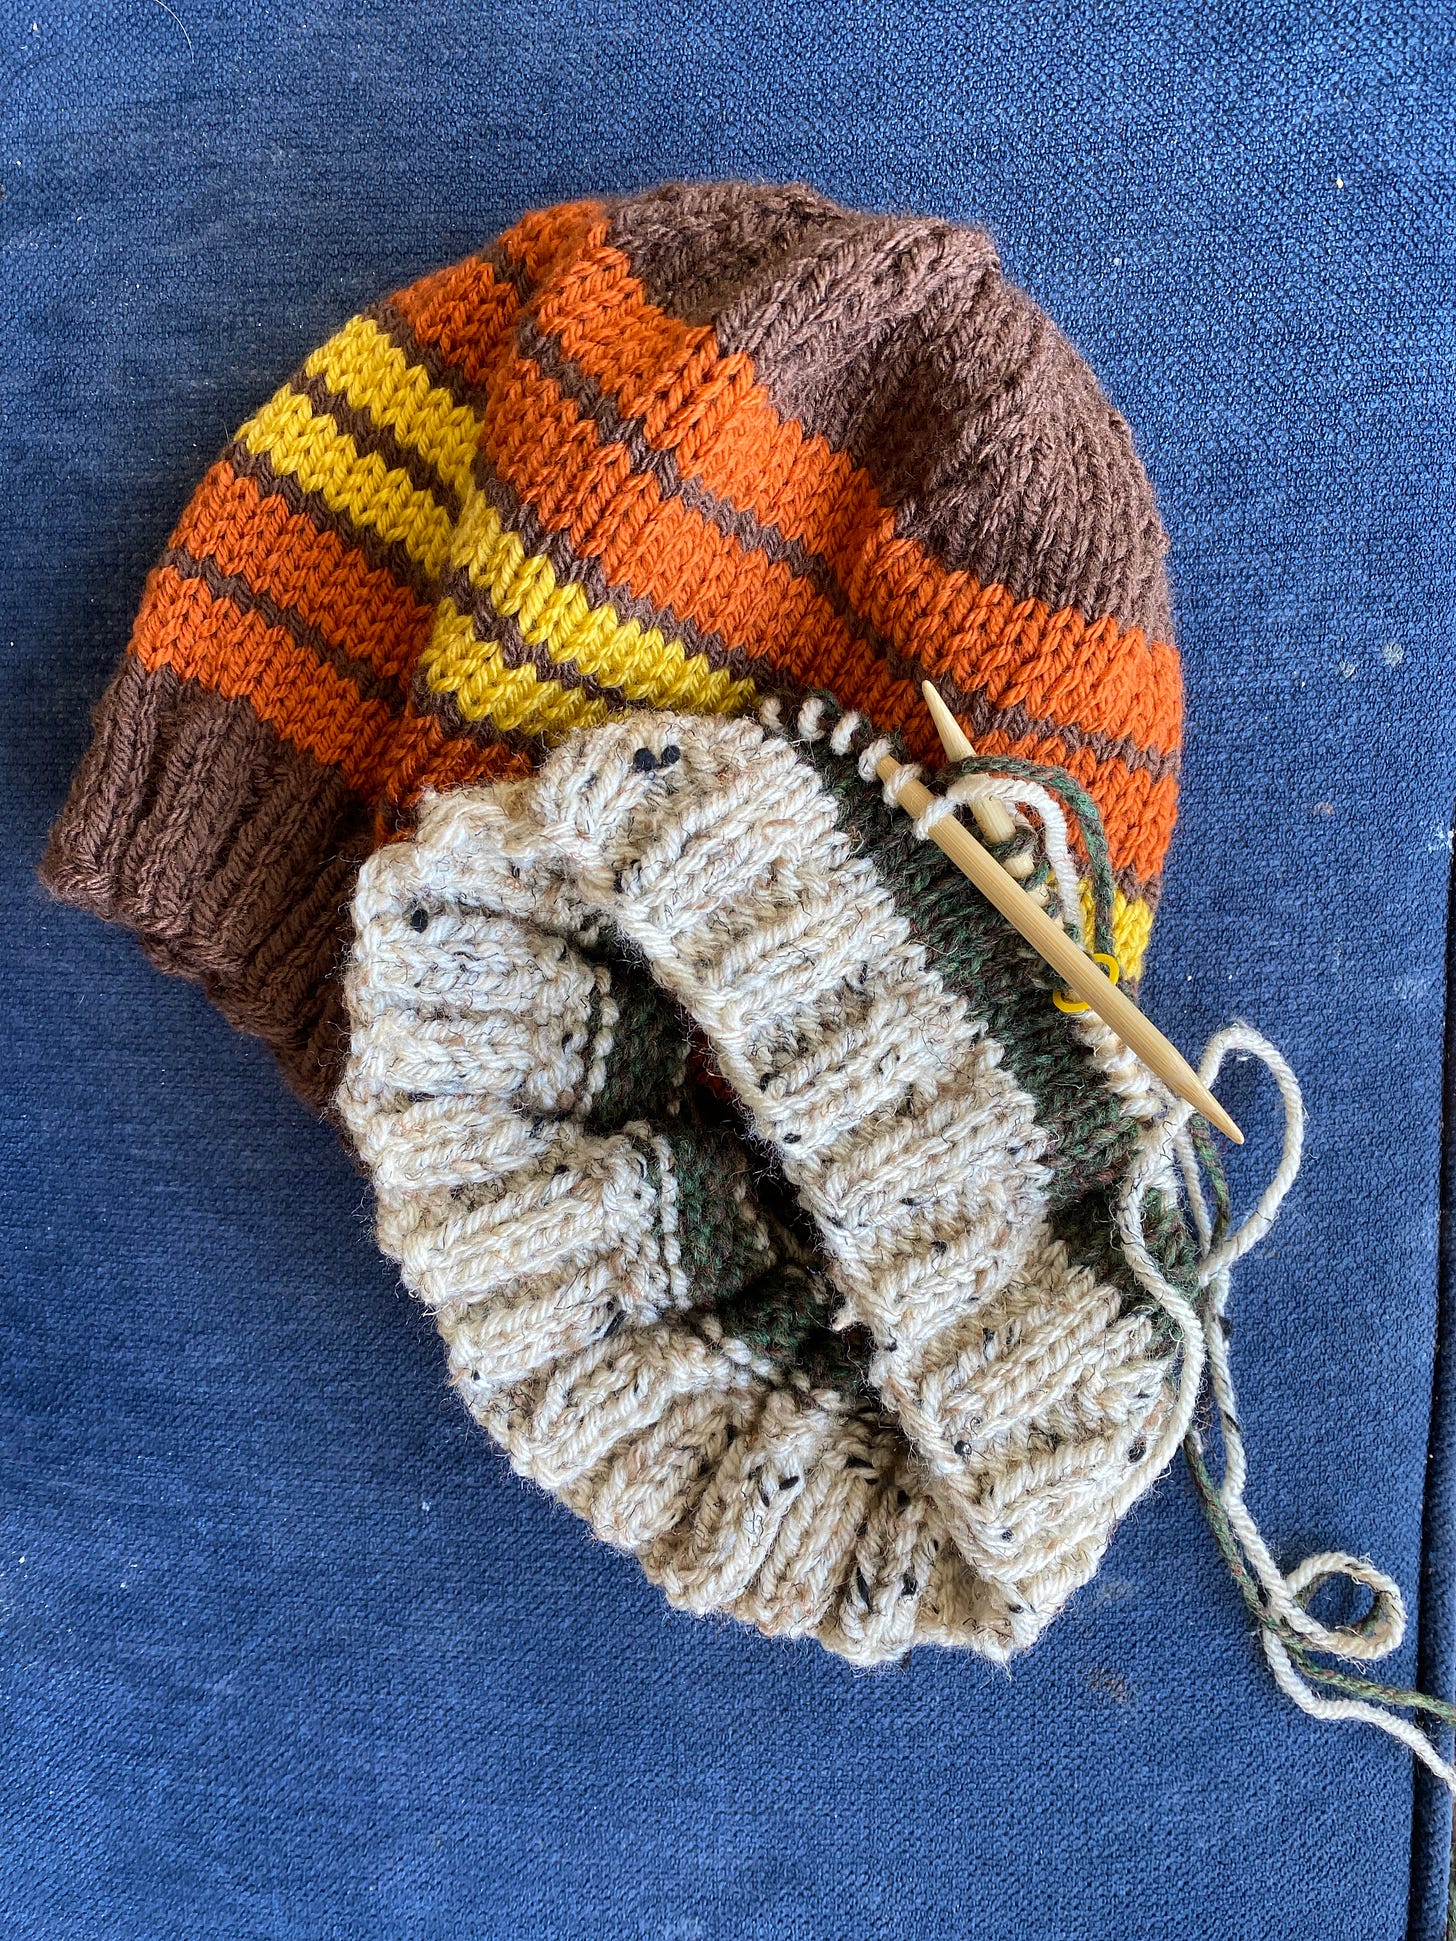 Handknit beanies. A completed on in shades of orange and one just started in oatmeal tweed and dark green.